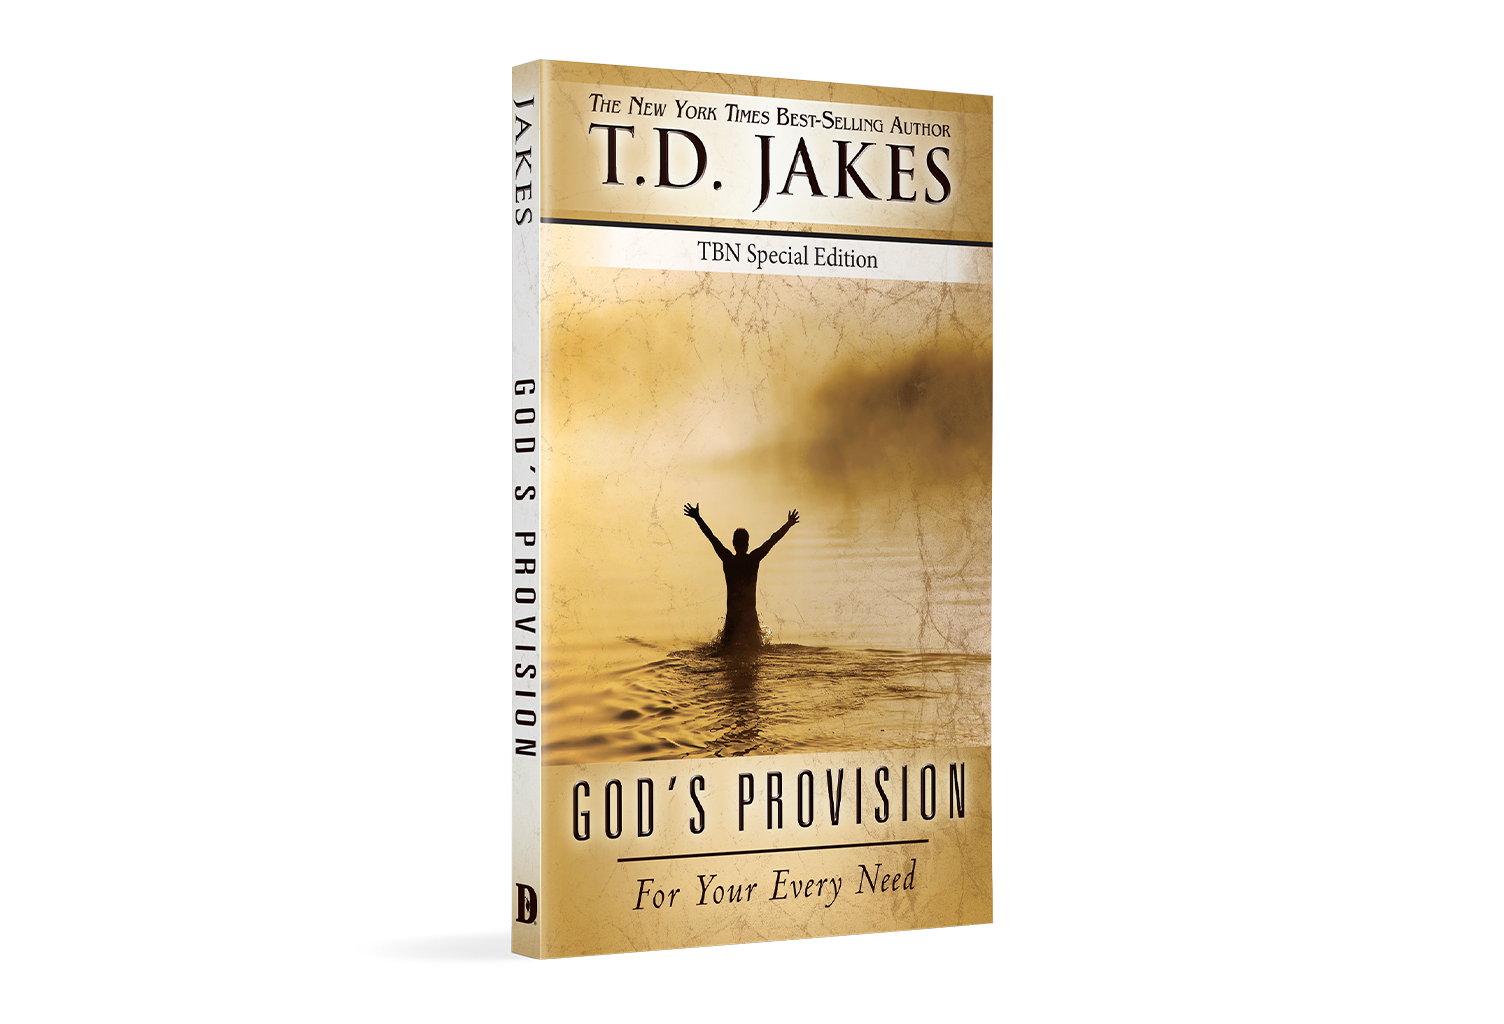 God’s Provision for Your Every Need by T.D. Jakes on TBN